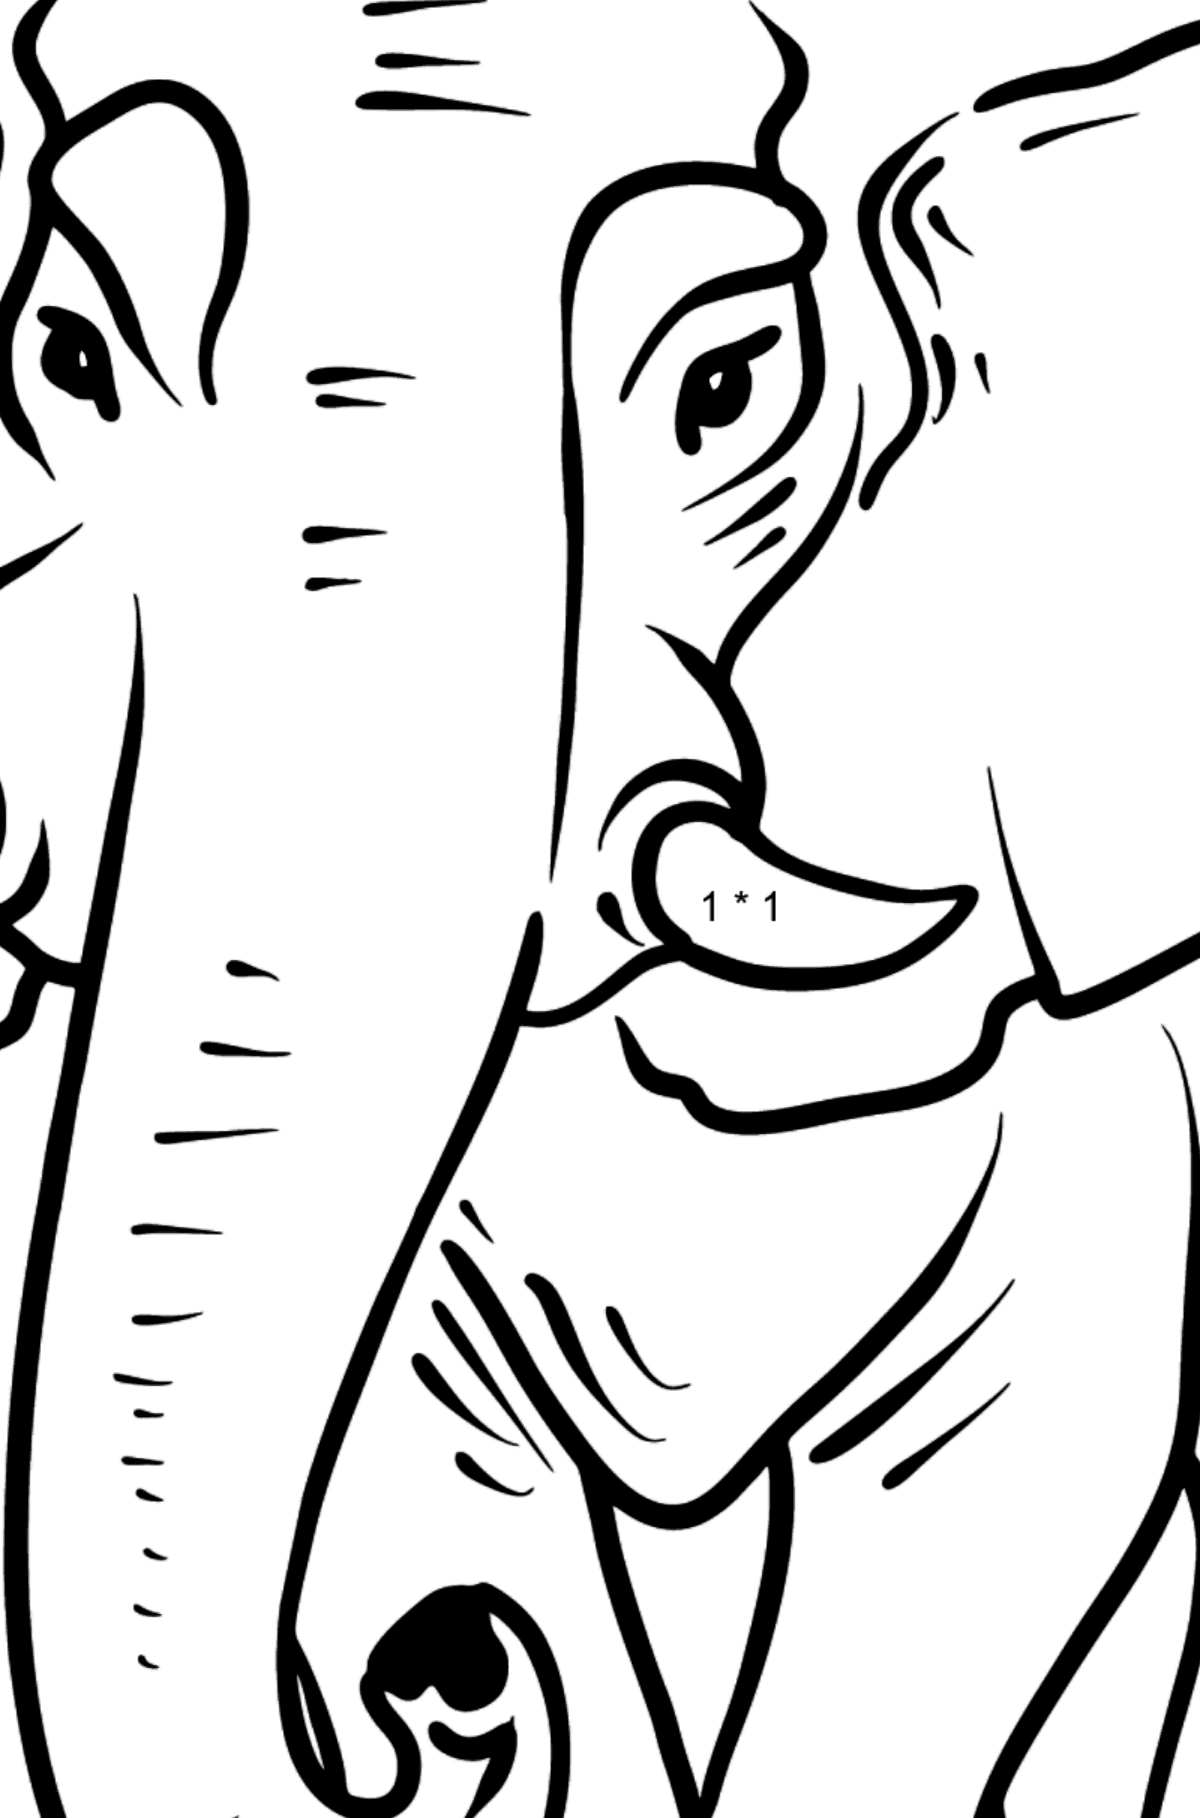 Elephant coloring page - Math Coloring - Multiplication for Kids